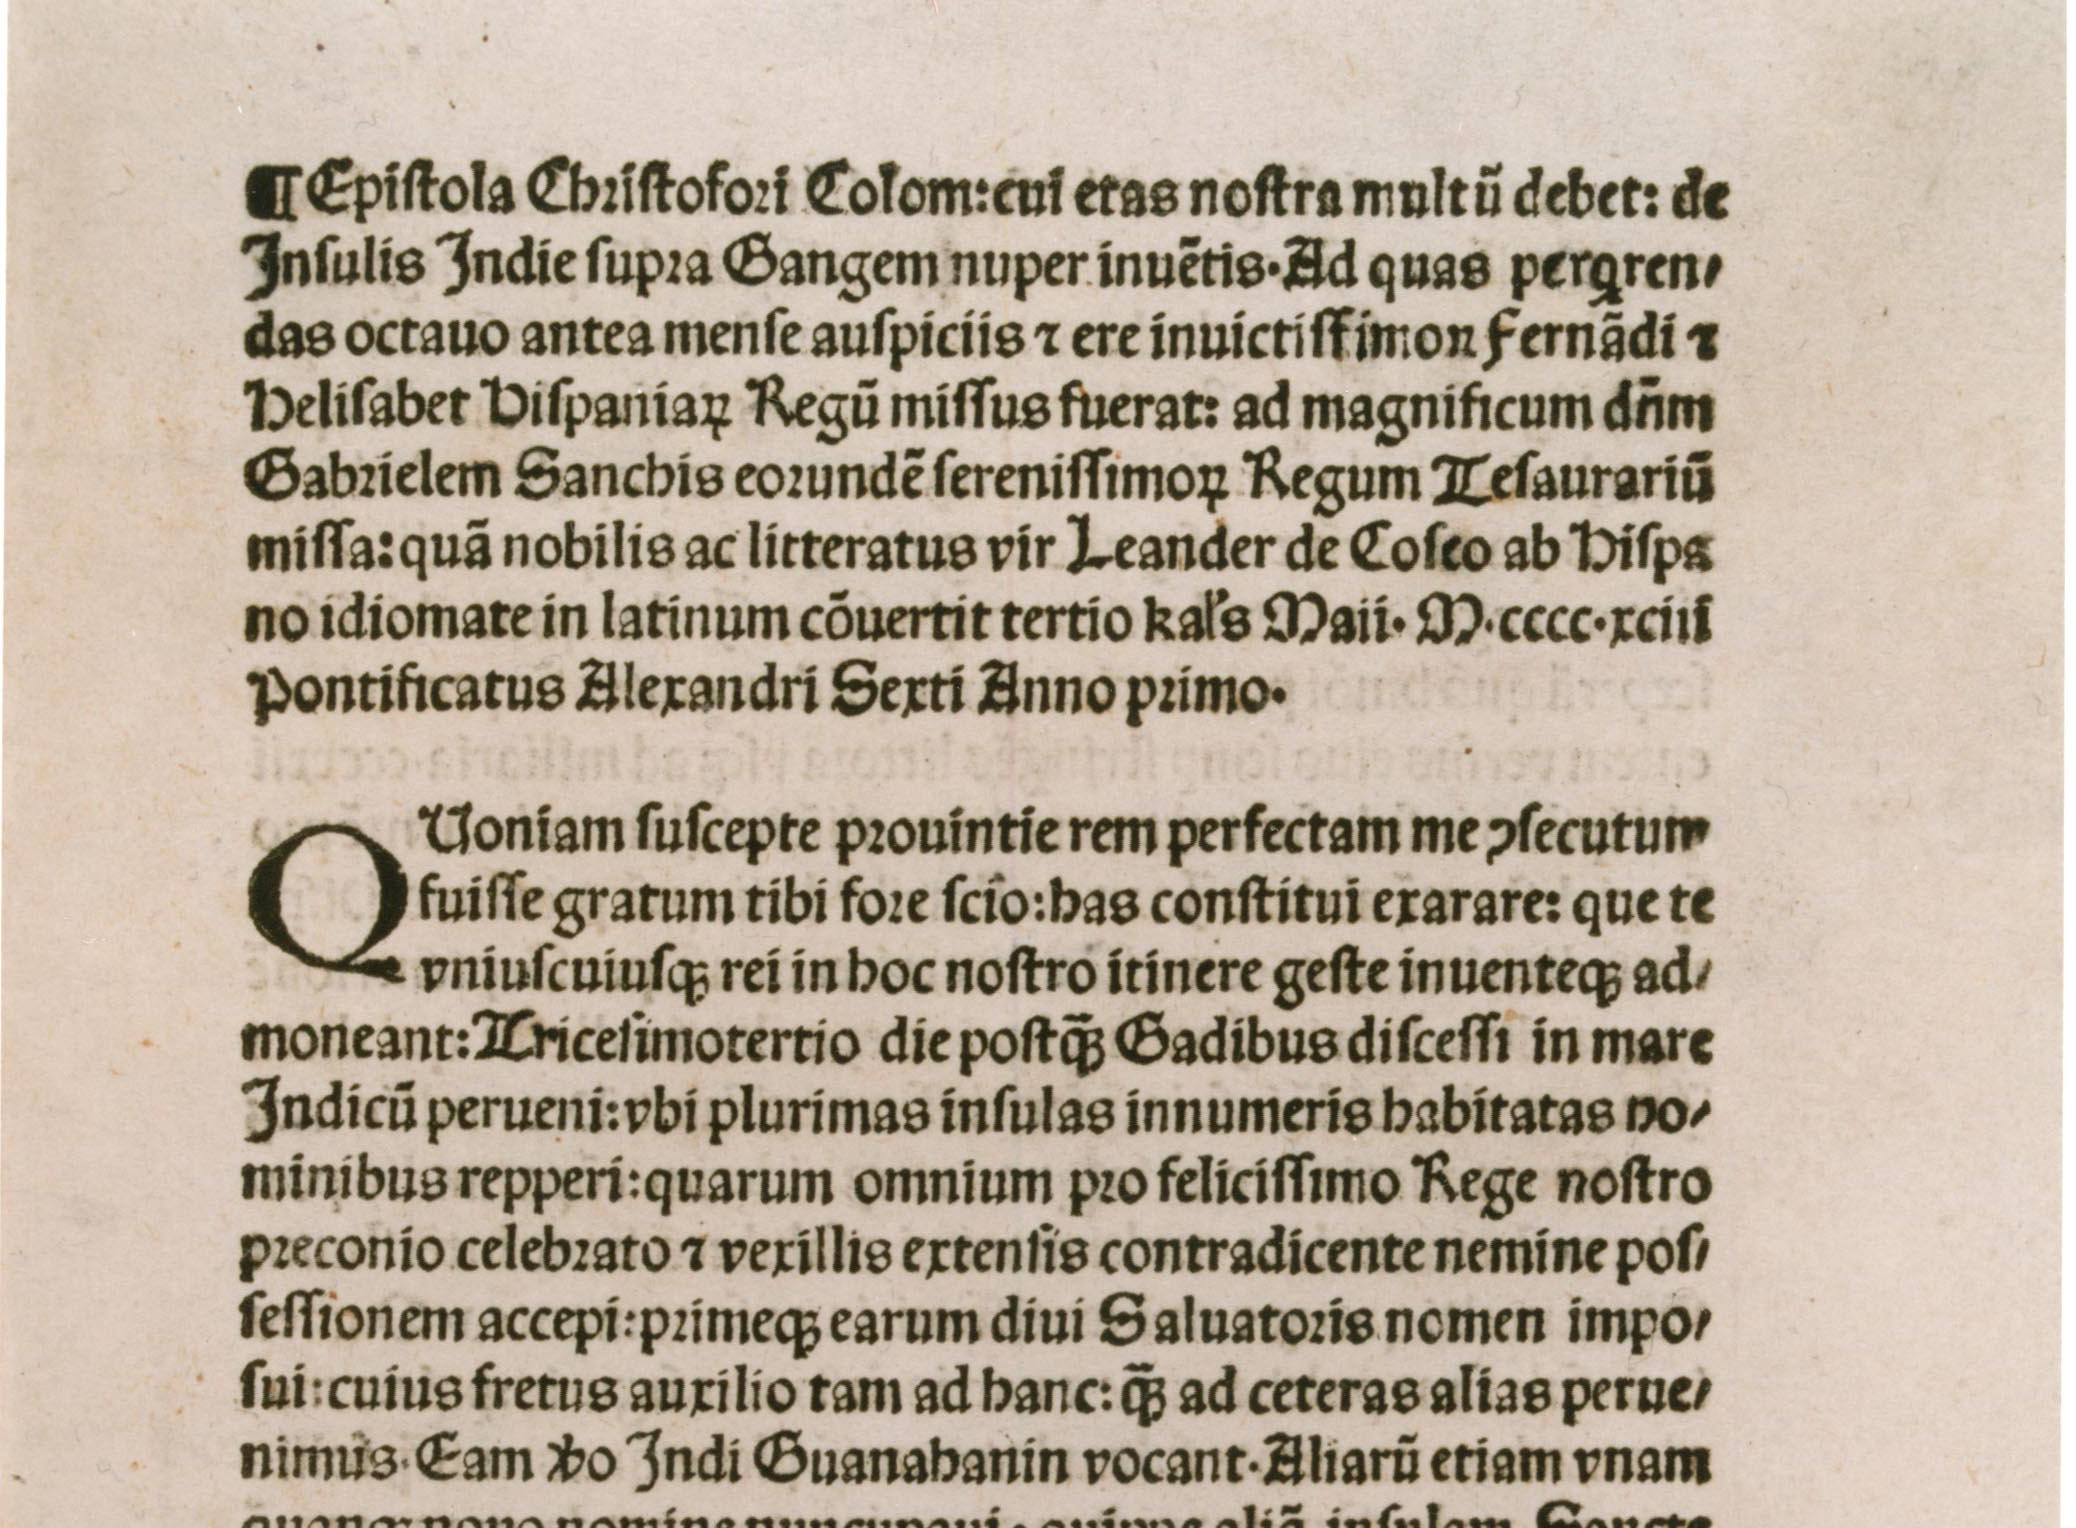 Christopher Columbus. Pamphlet: First Edition, in Latin, second(corrected)issue, 1493 (GLC 1427 page 1. The Gilder Lehrman Collection, on deposit at the Pierpont Morgan Library.)